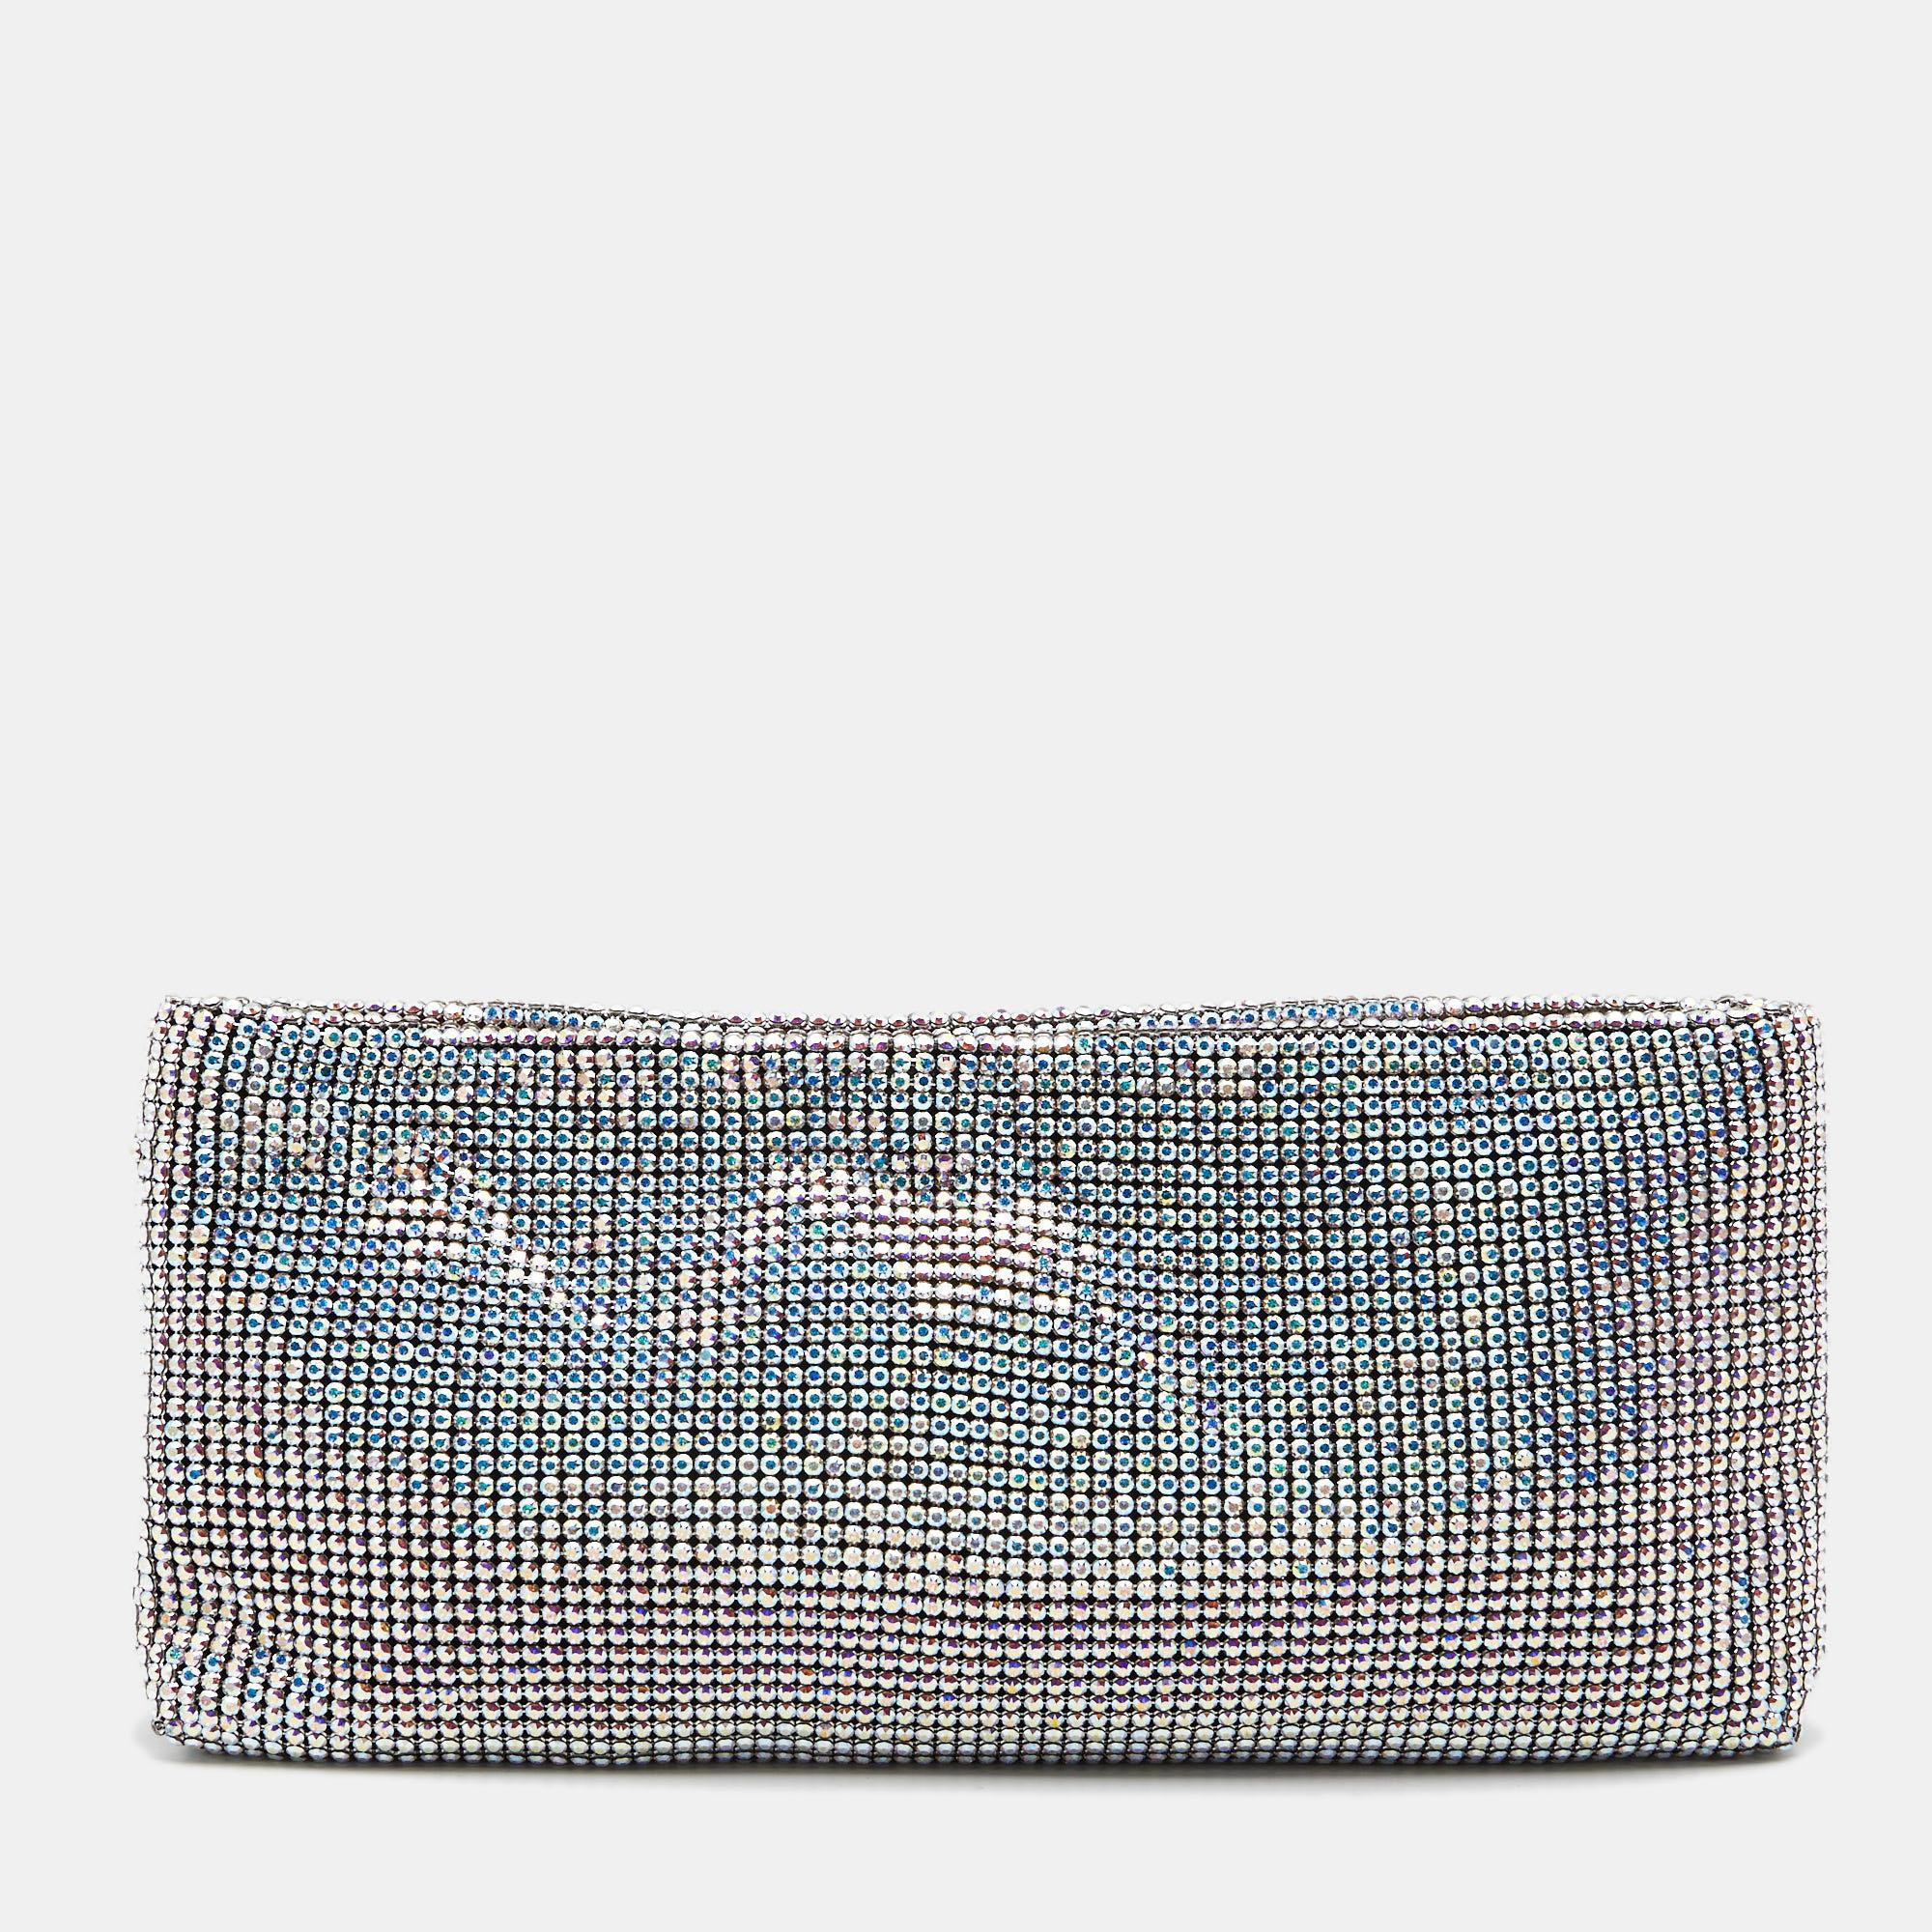 Christian Louboutin presents to you this shimmering clutch for parties and night outings! It is crafted from sparkling crystals and silver-tone hardware. It is complete with a well-sized fabric interior.

Includes: Original Dustbag